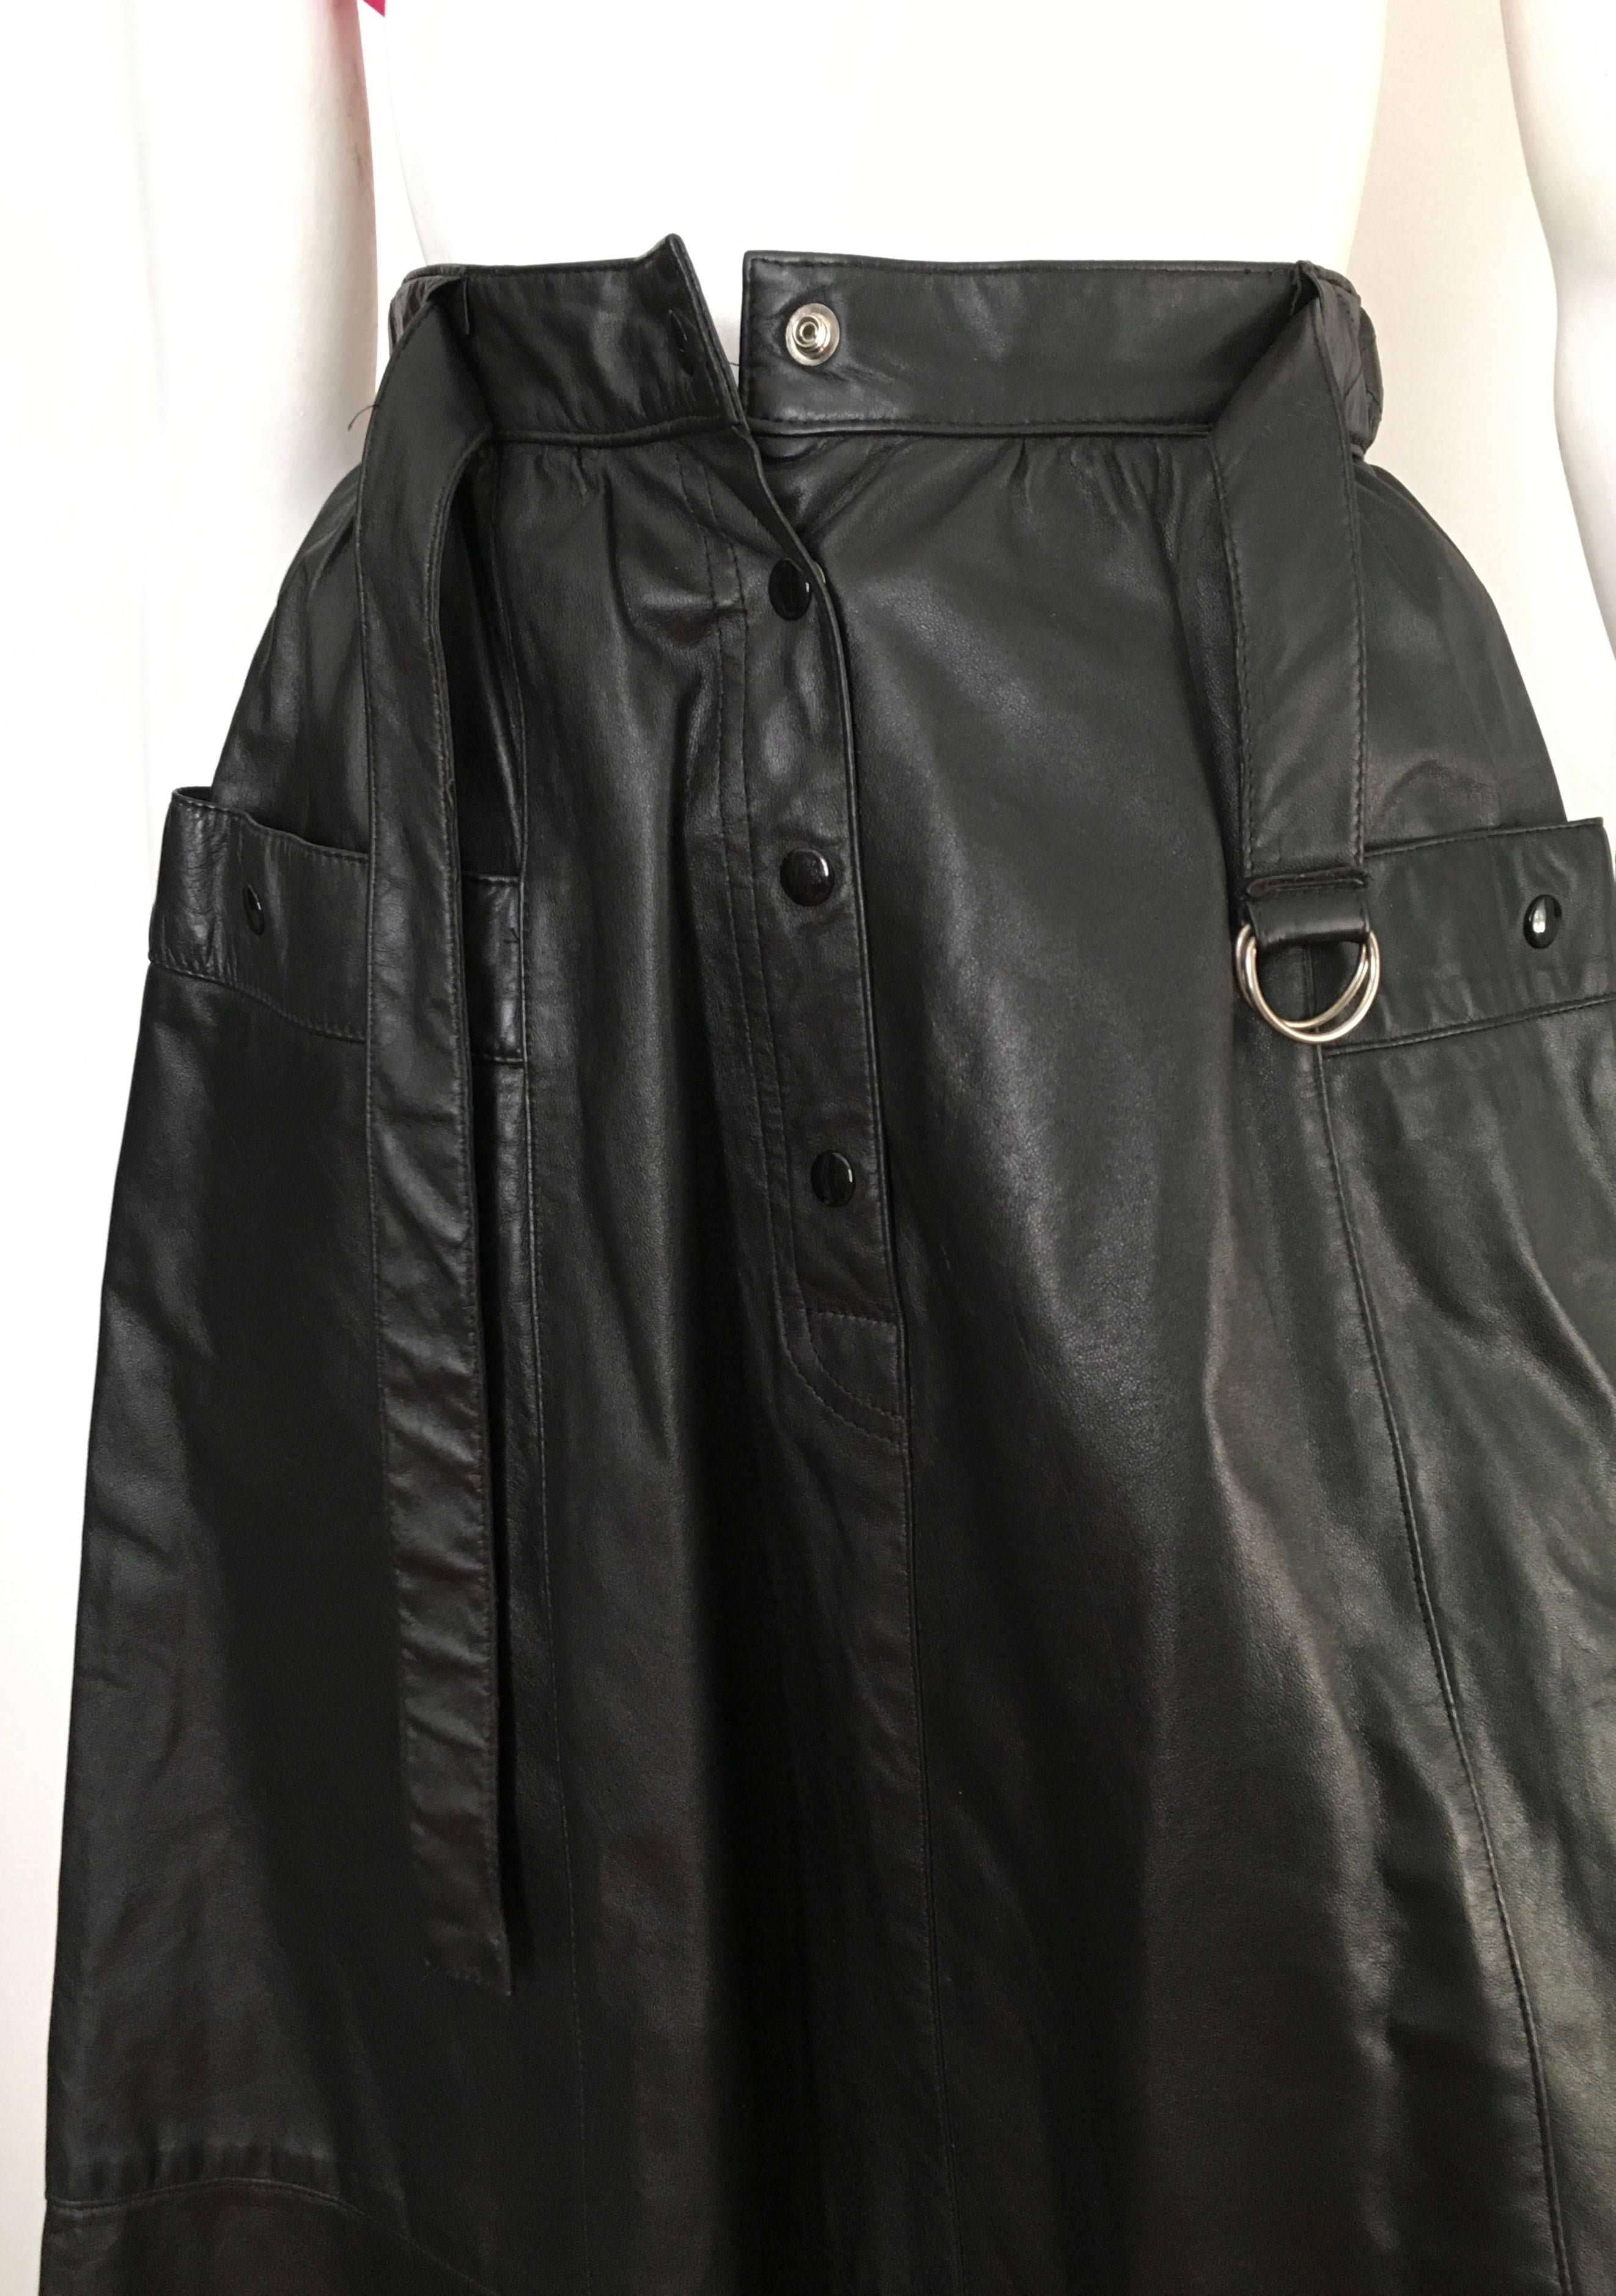 Saks Fifth Avenue 1980s Black Leather A Line Skirt with Pockets Size 4.  For Sale 10